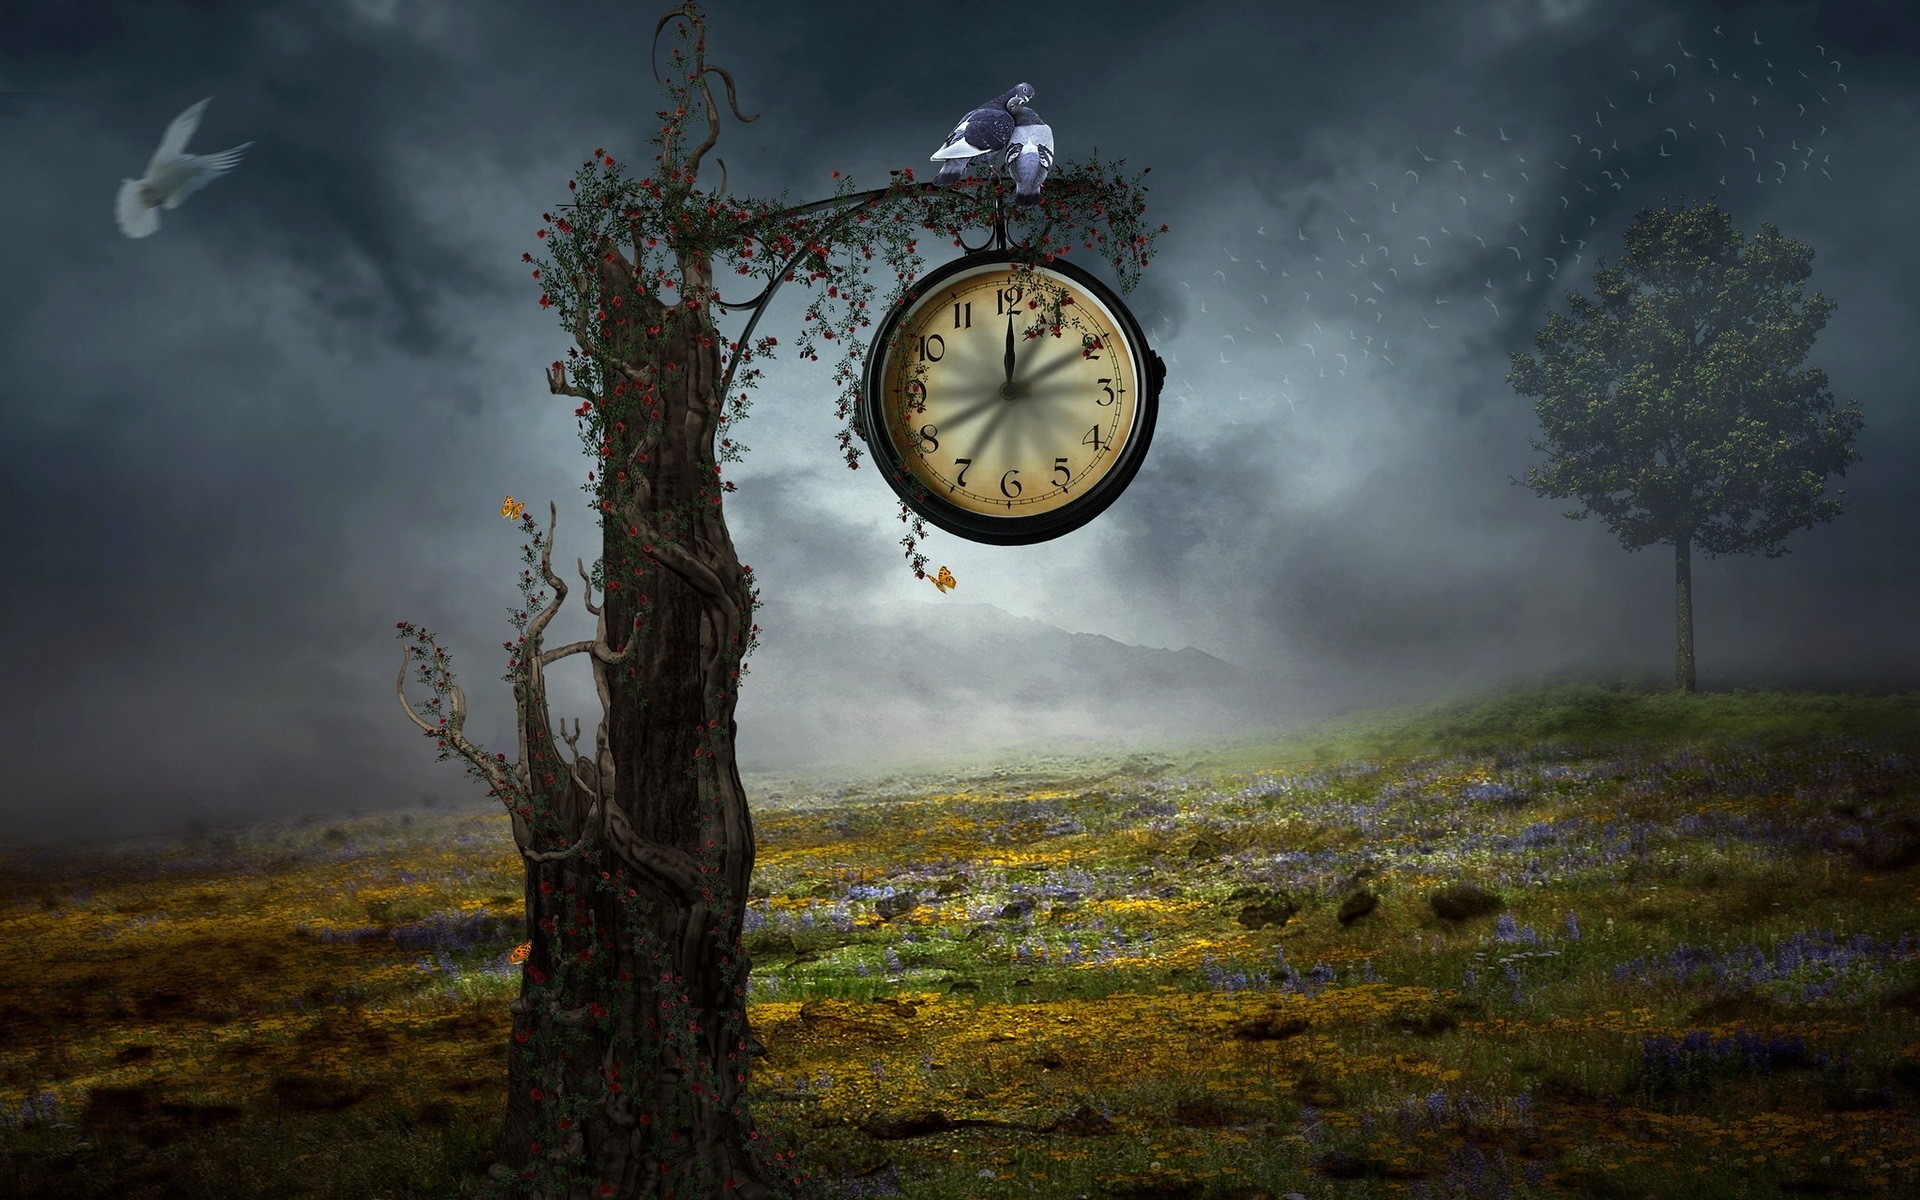 fantasy dawn sunset sky nature fog landscape time early outdoors tree evening sun travel dusk wood clock grass flower tree vintage watch background